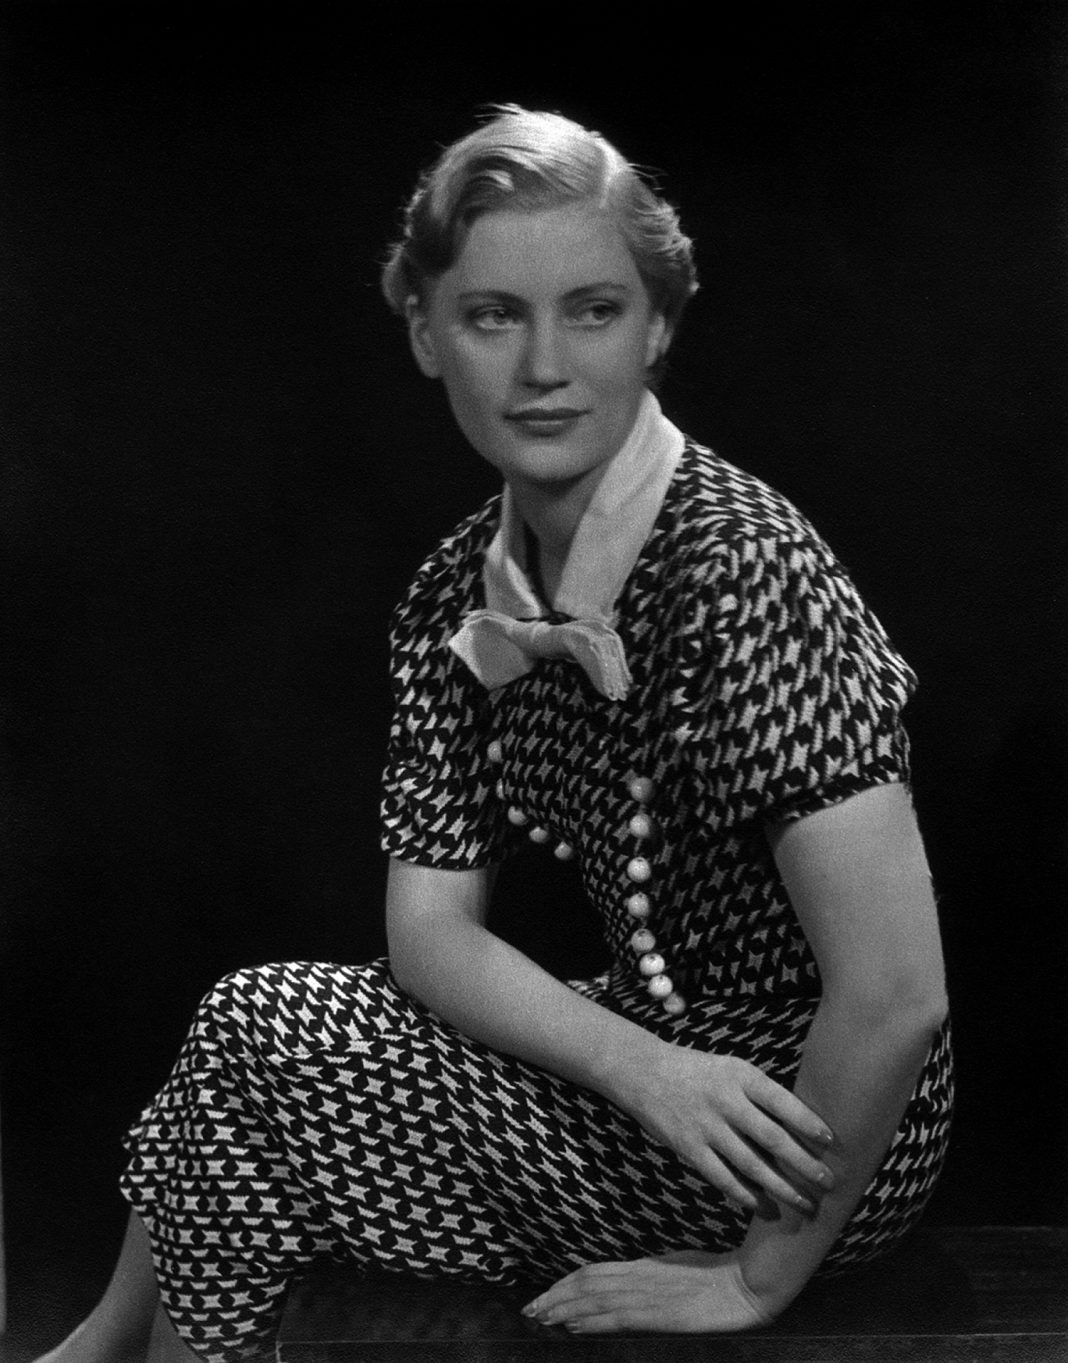 Self portrait in black and white patterned dress